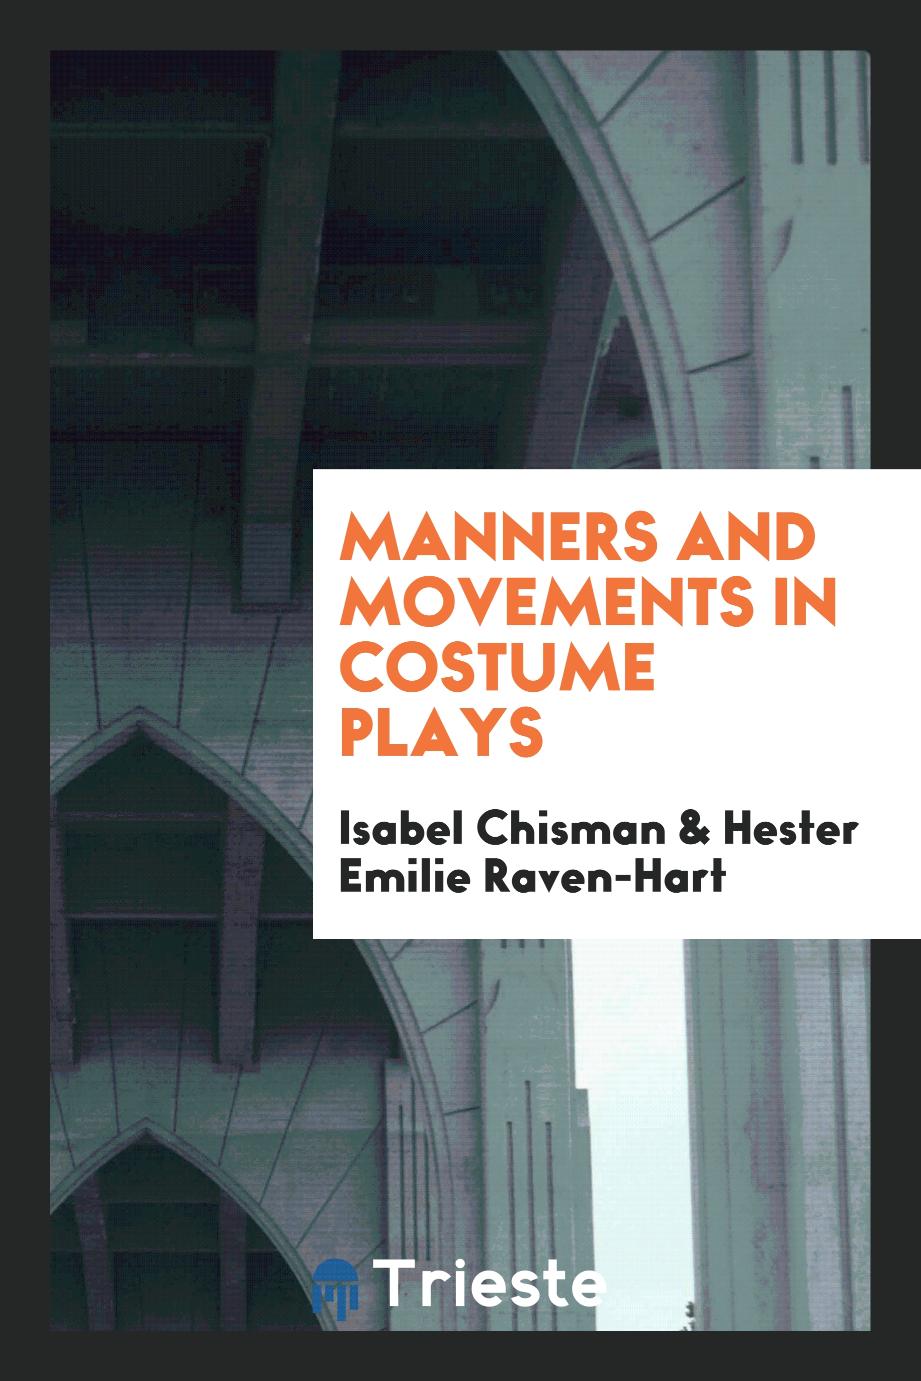 Manners and movements in costume plays